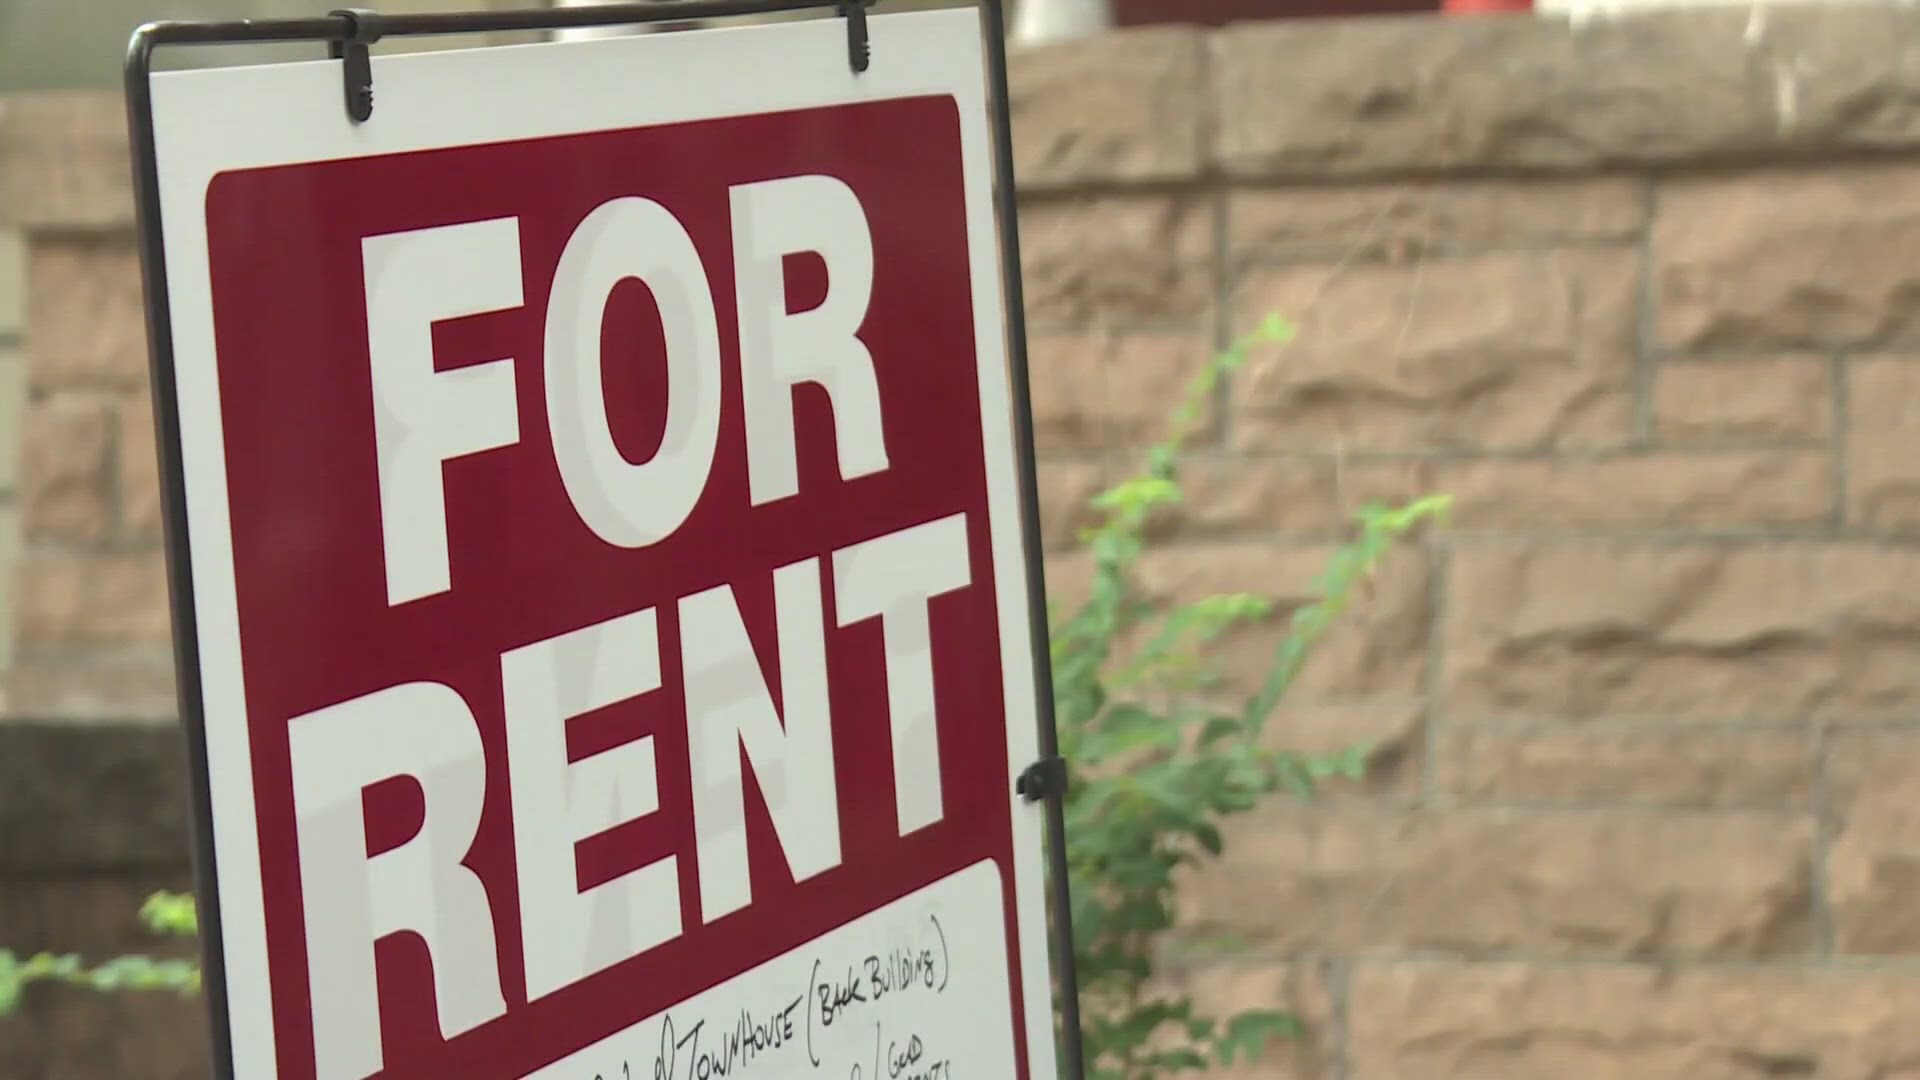 A recent slowdown in the Denver area housing market is shaping up to be good news for renters. Real estate expert Lane Lyon explains.